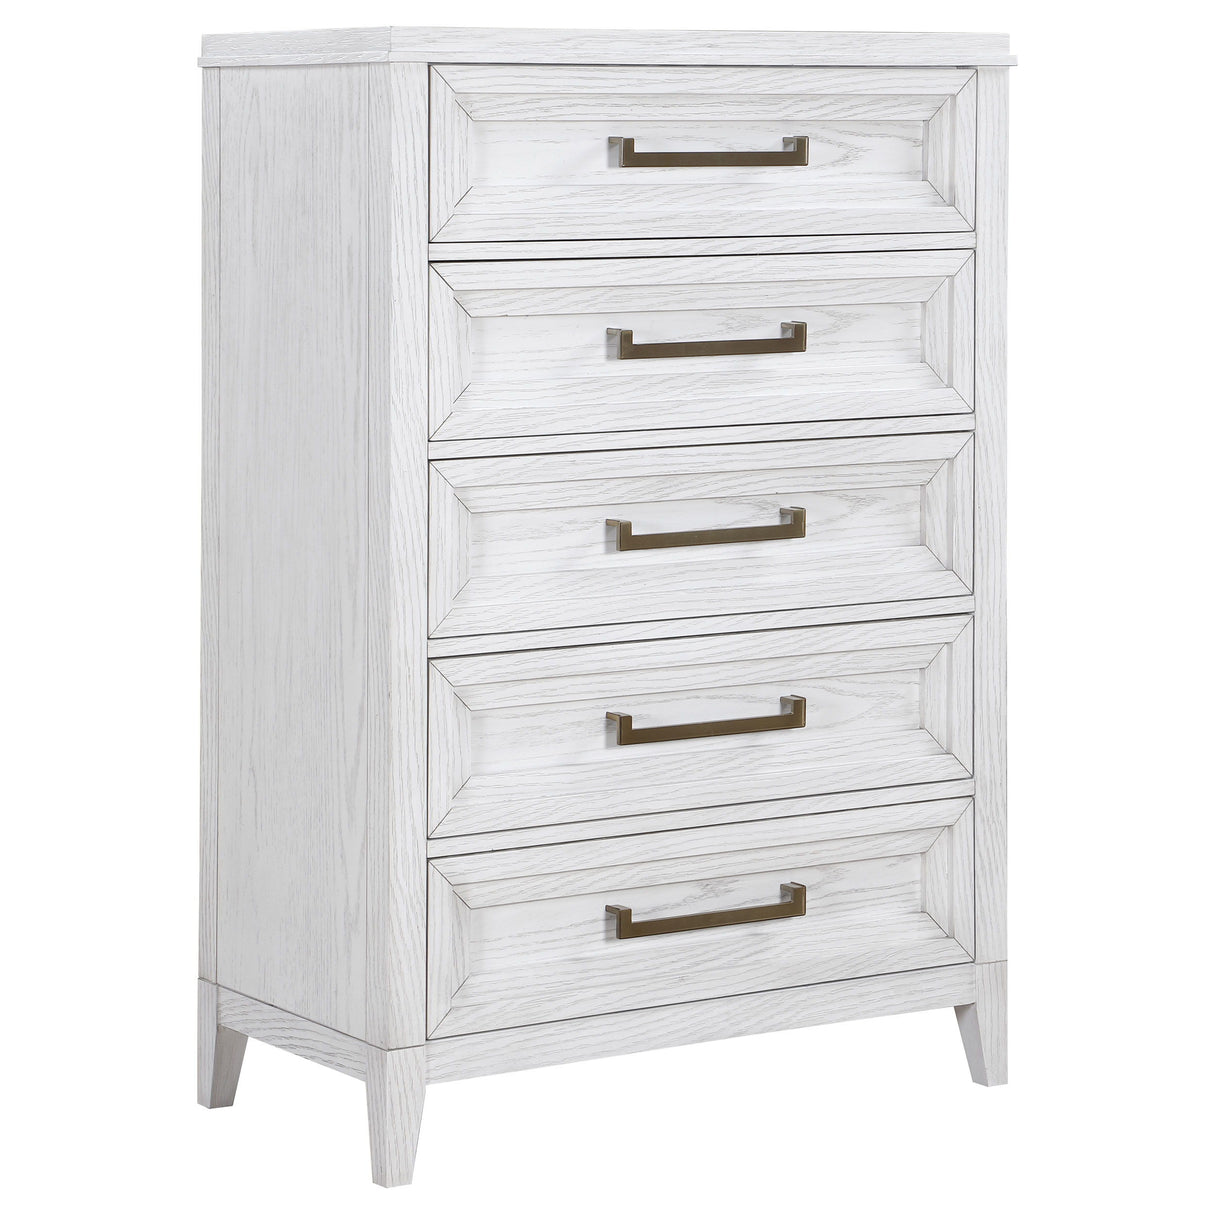 Marielle - 5 Drawer Bedroom Chest - Distressed White